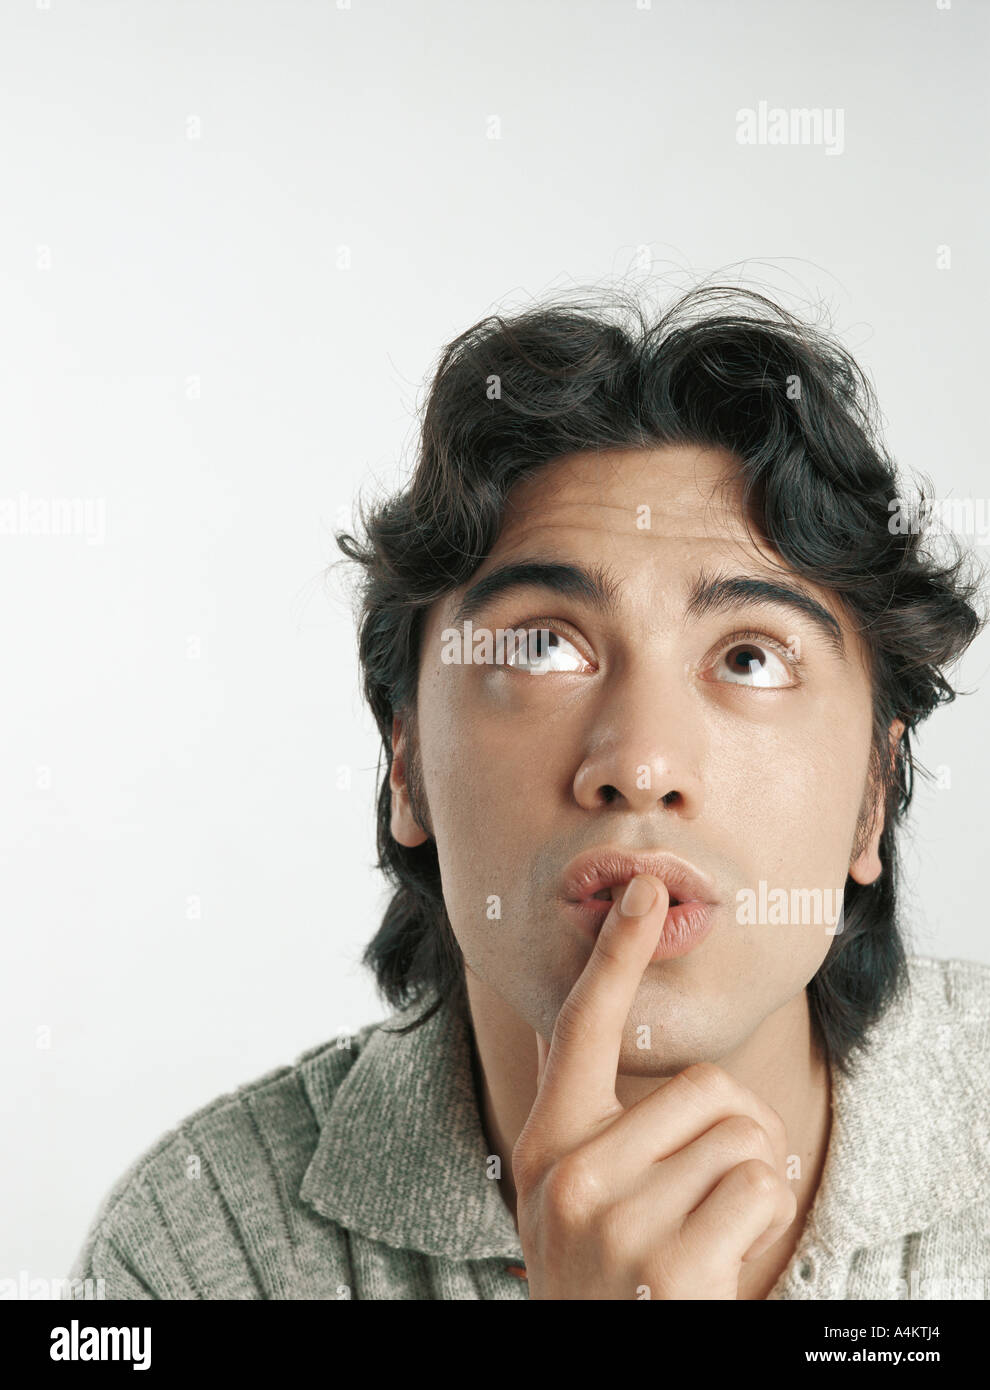 Man looking up with finger on lips Stock Photo